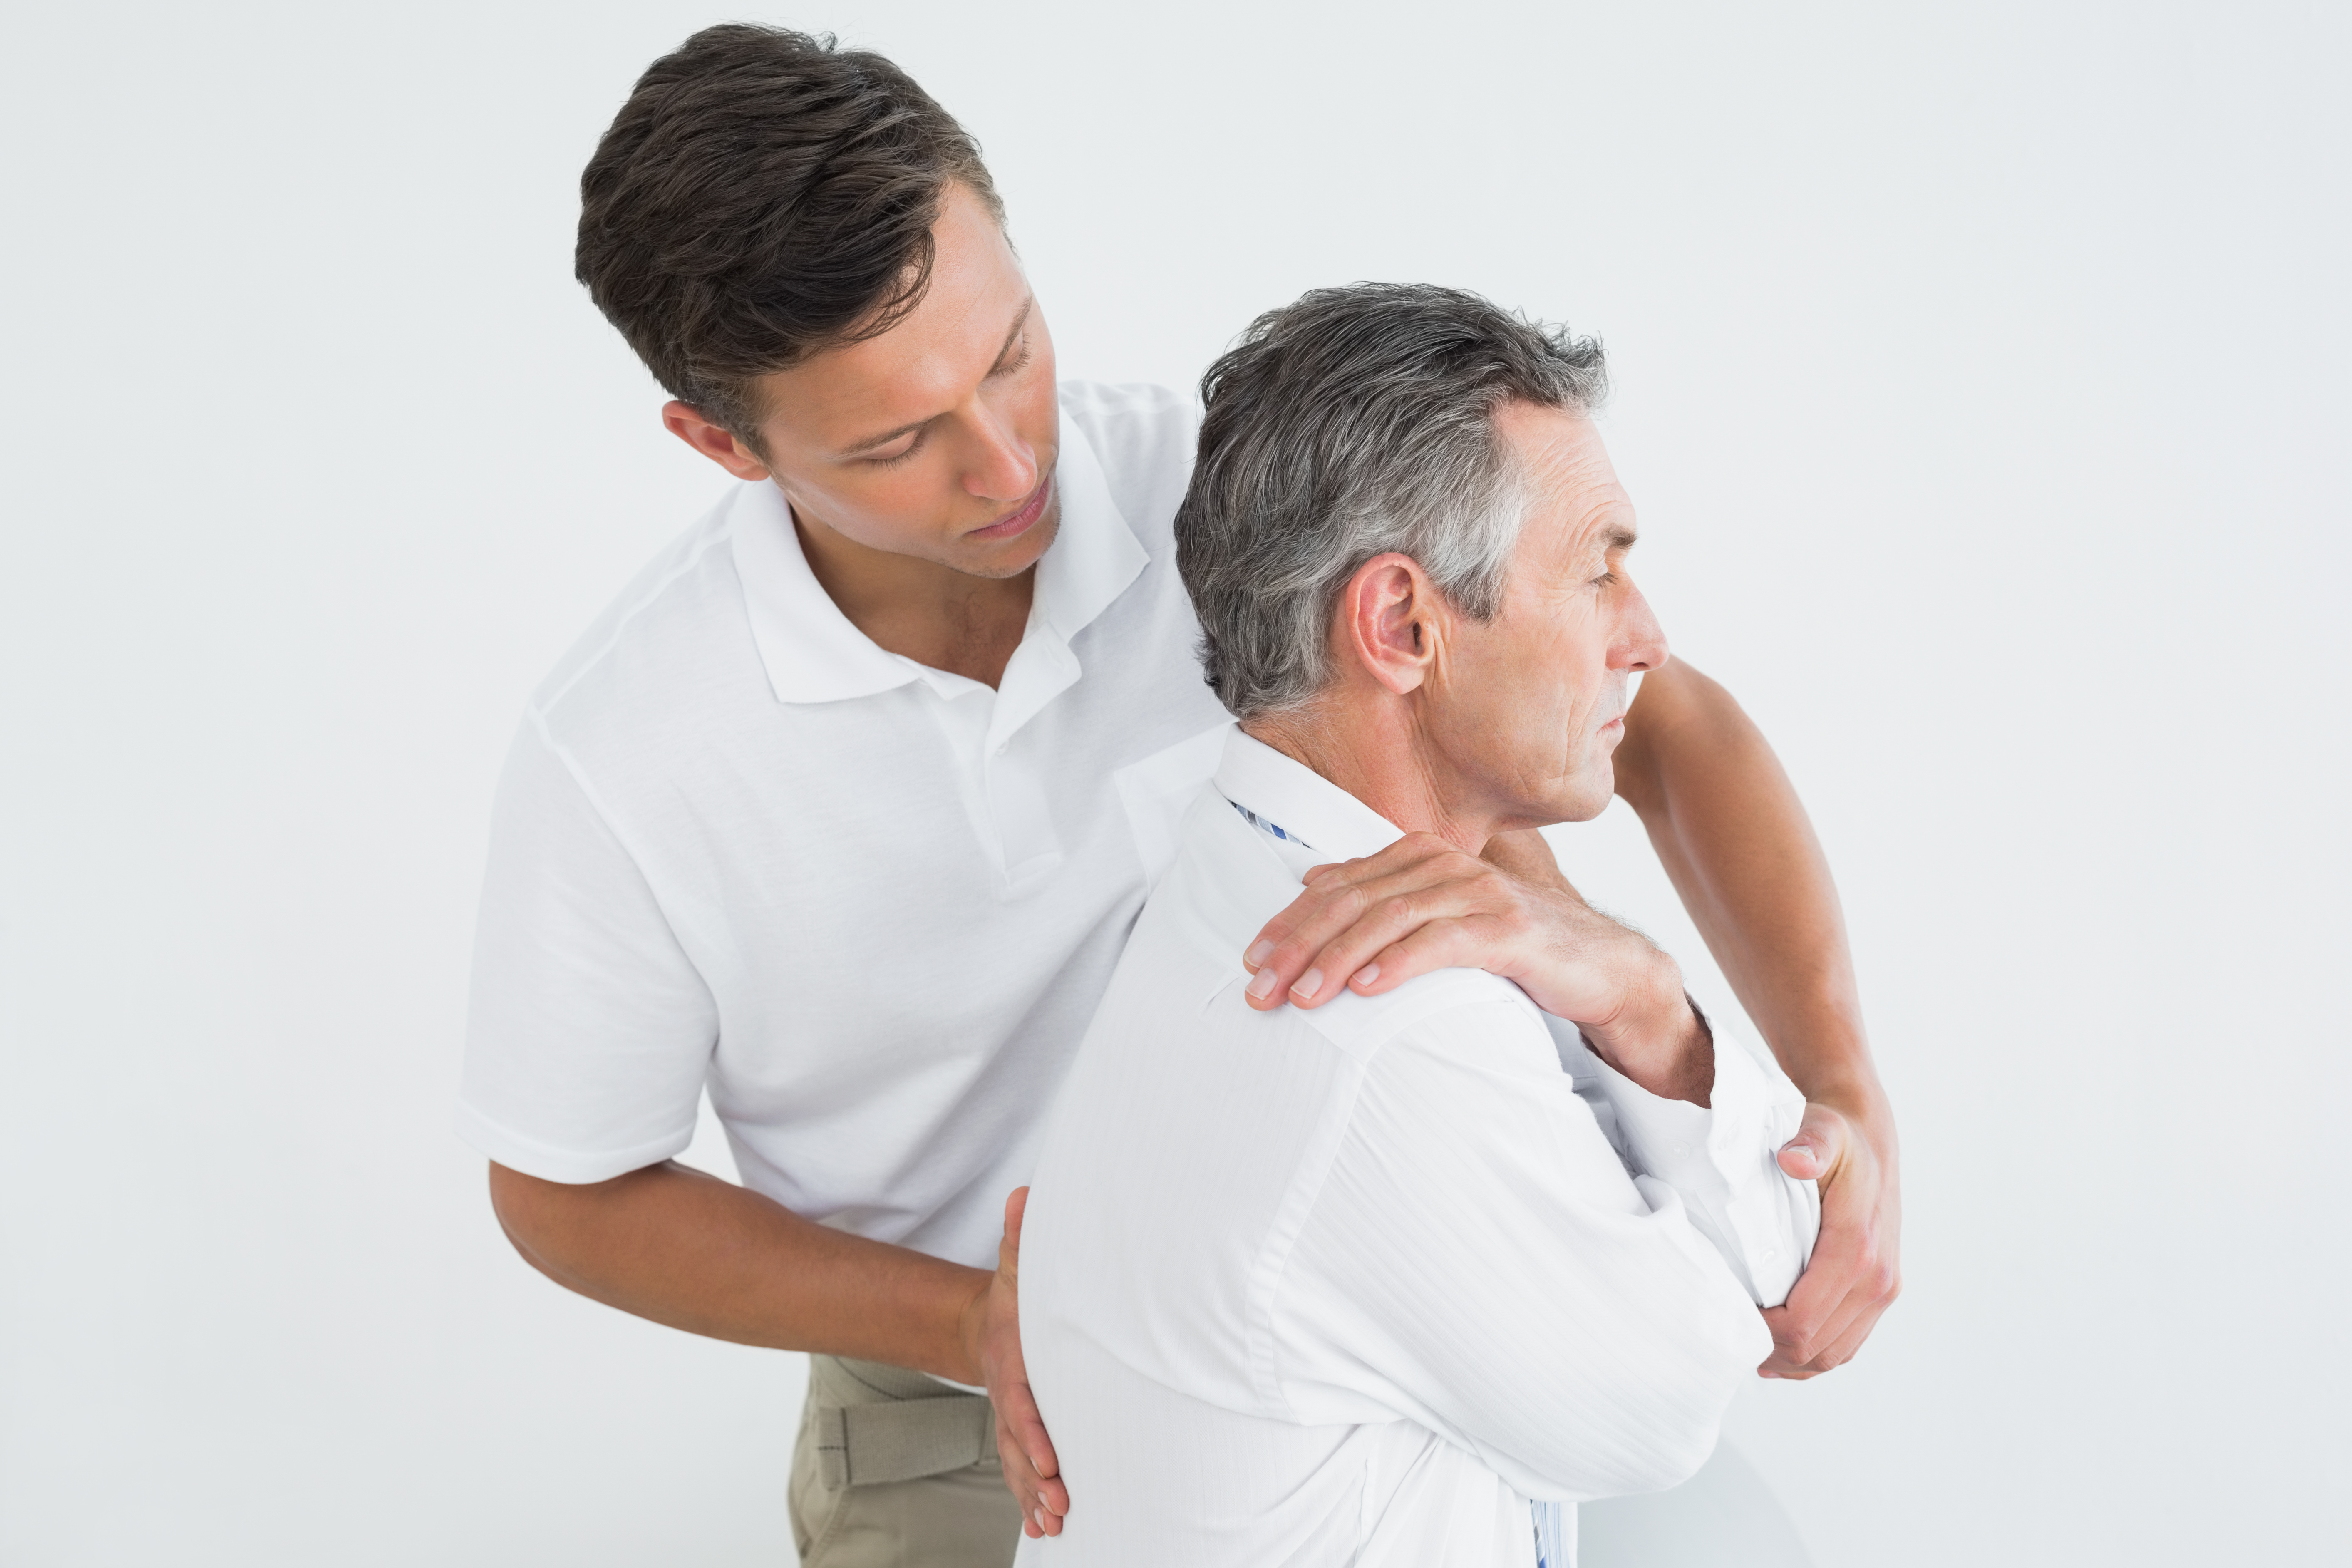 6 Benefits of Physical Therapy for Back Pain